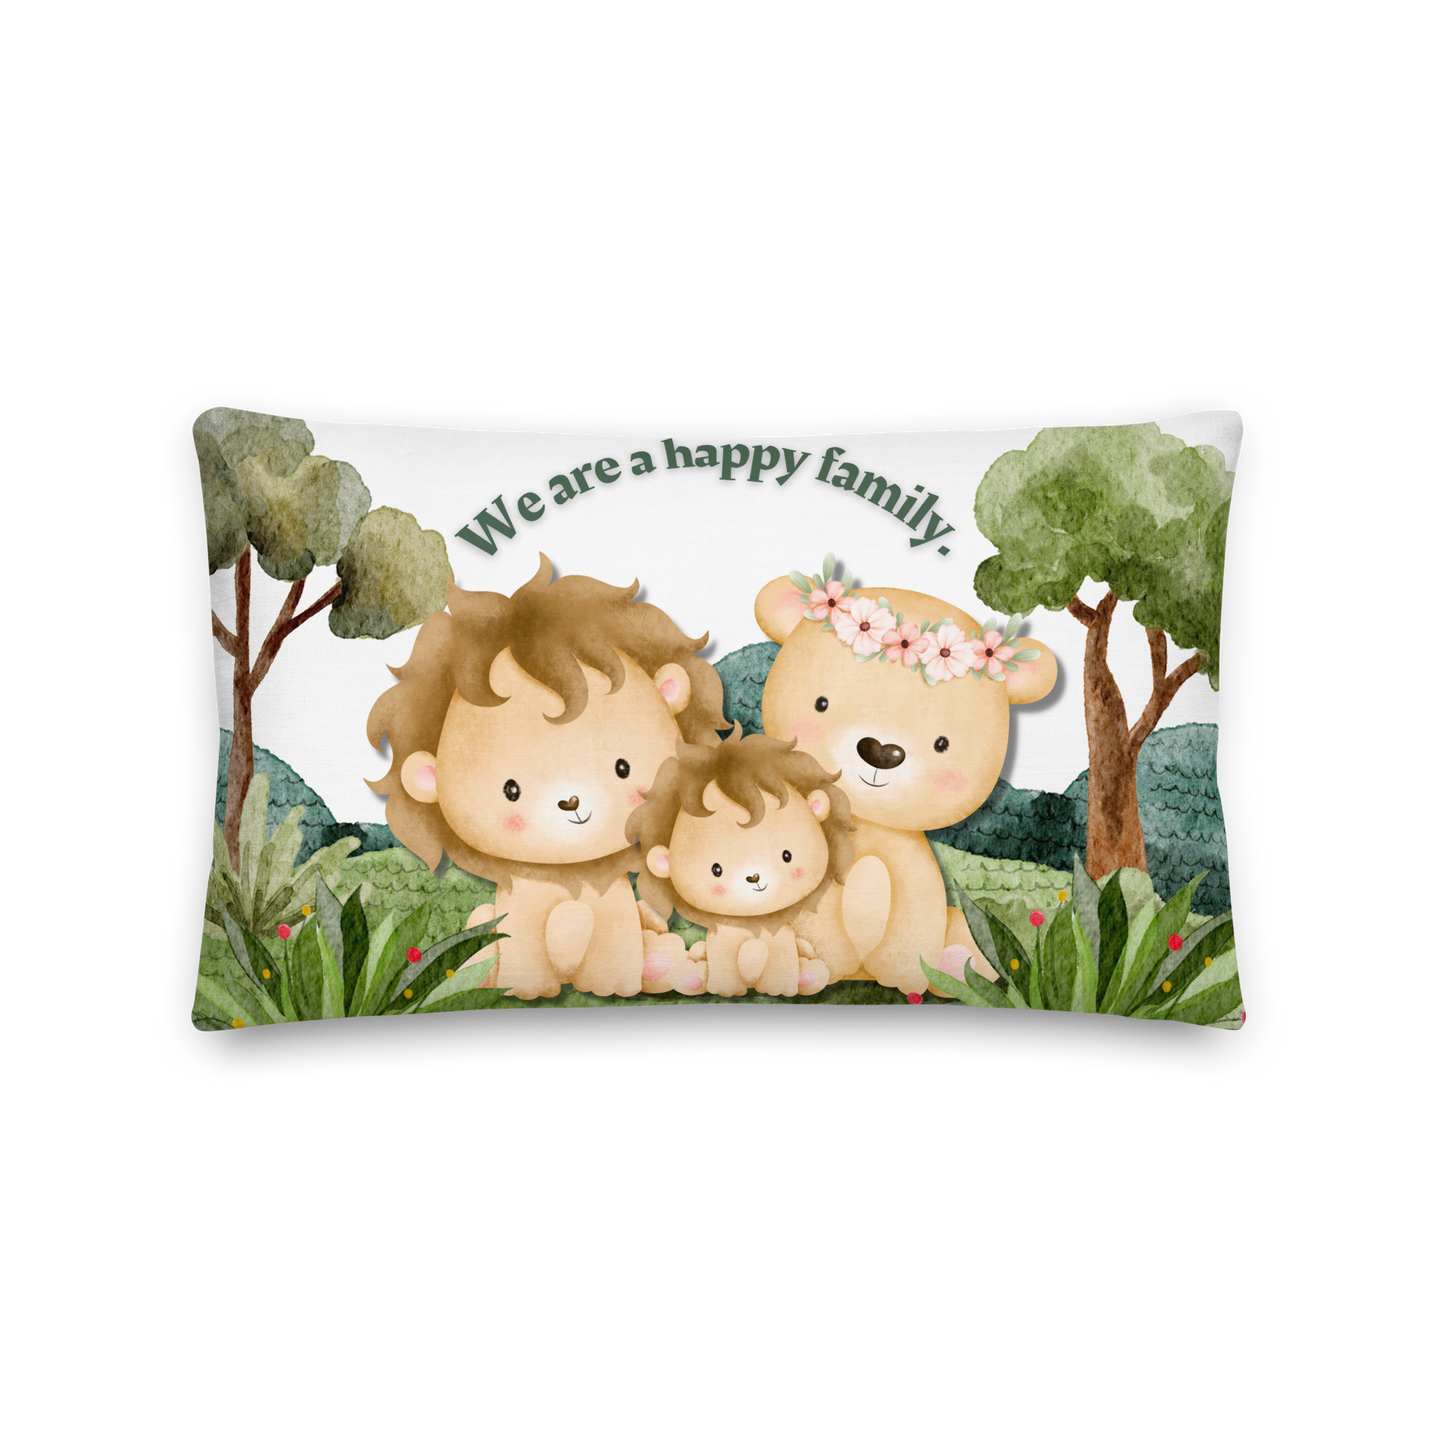 Premium Pillow | 18″×18″, 20″×12″, 22″×22″ | We are a happy family Lion | Animal Themed